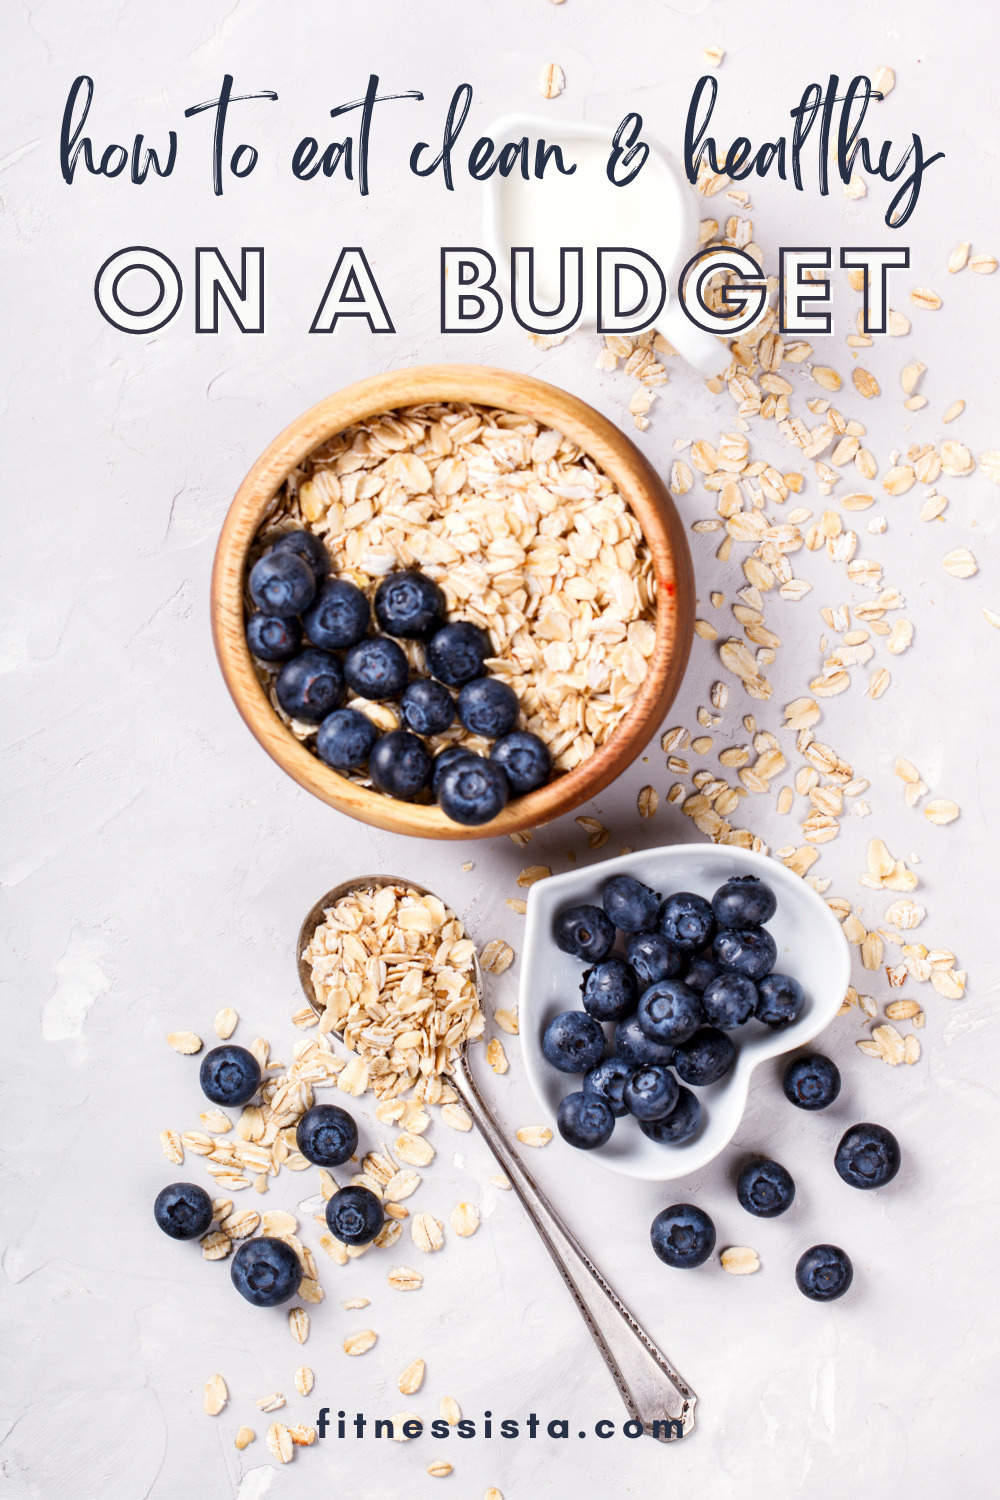 How to eat clean and healthy on a budget